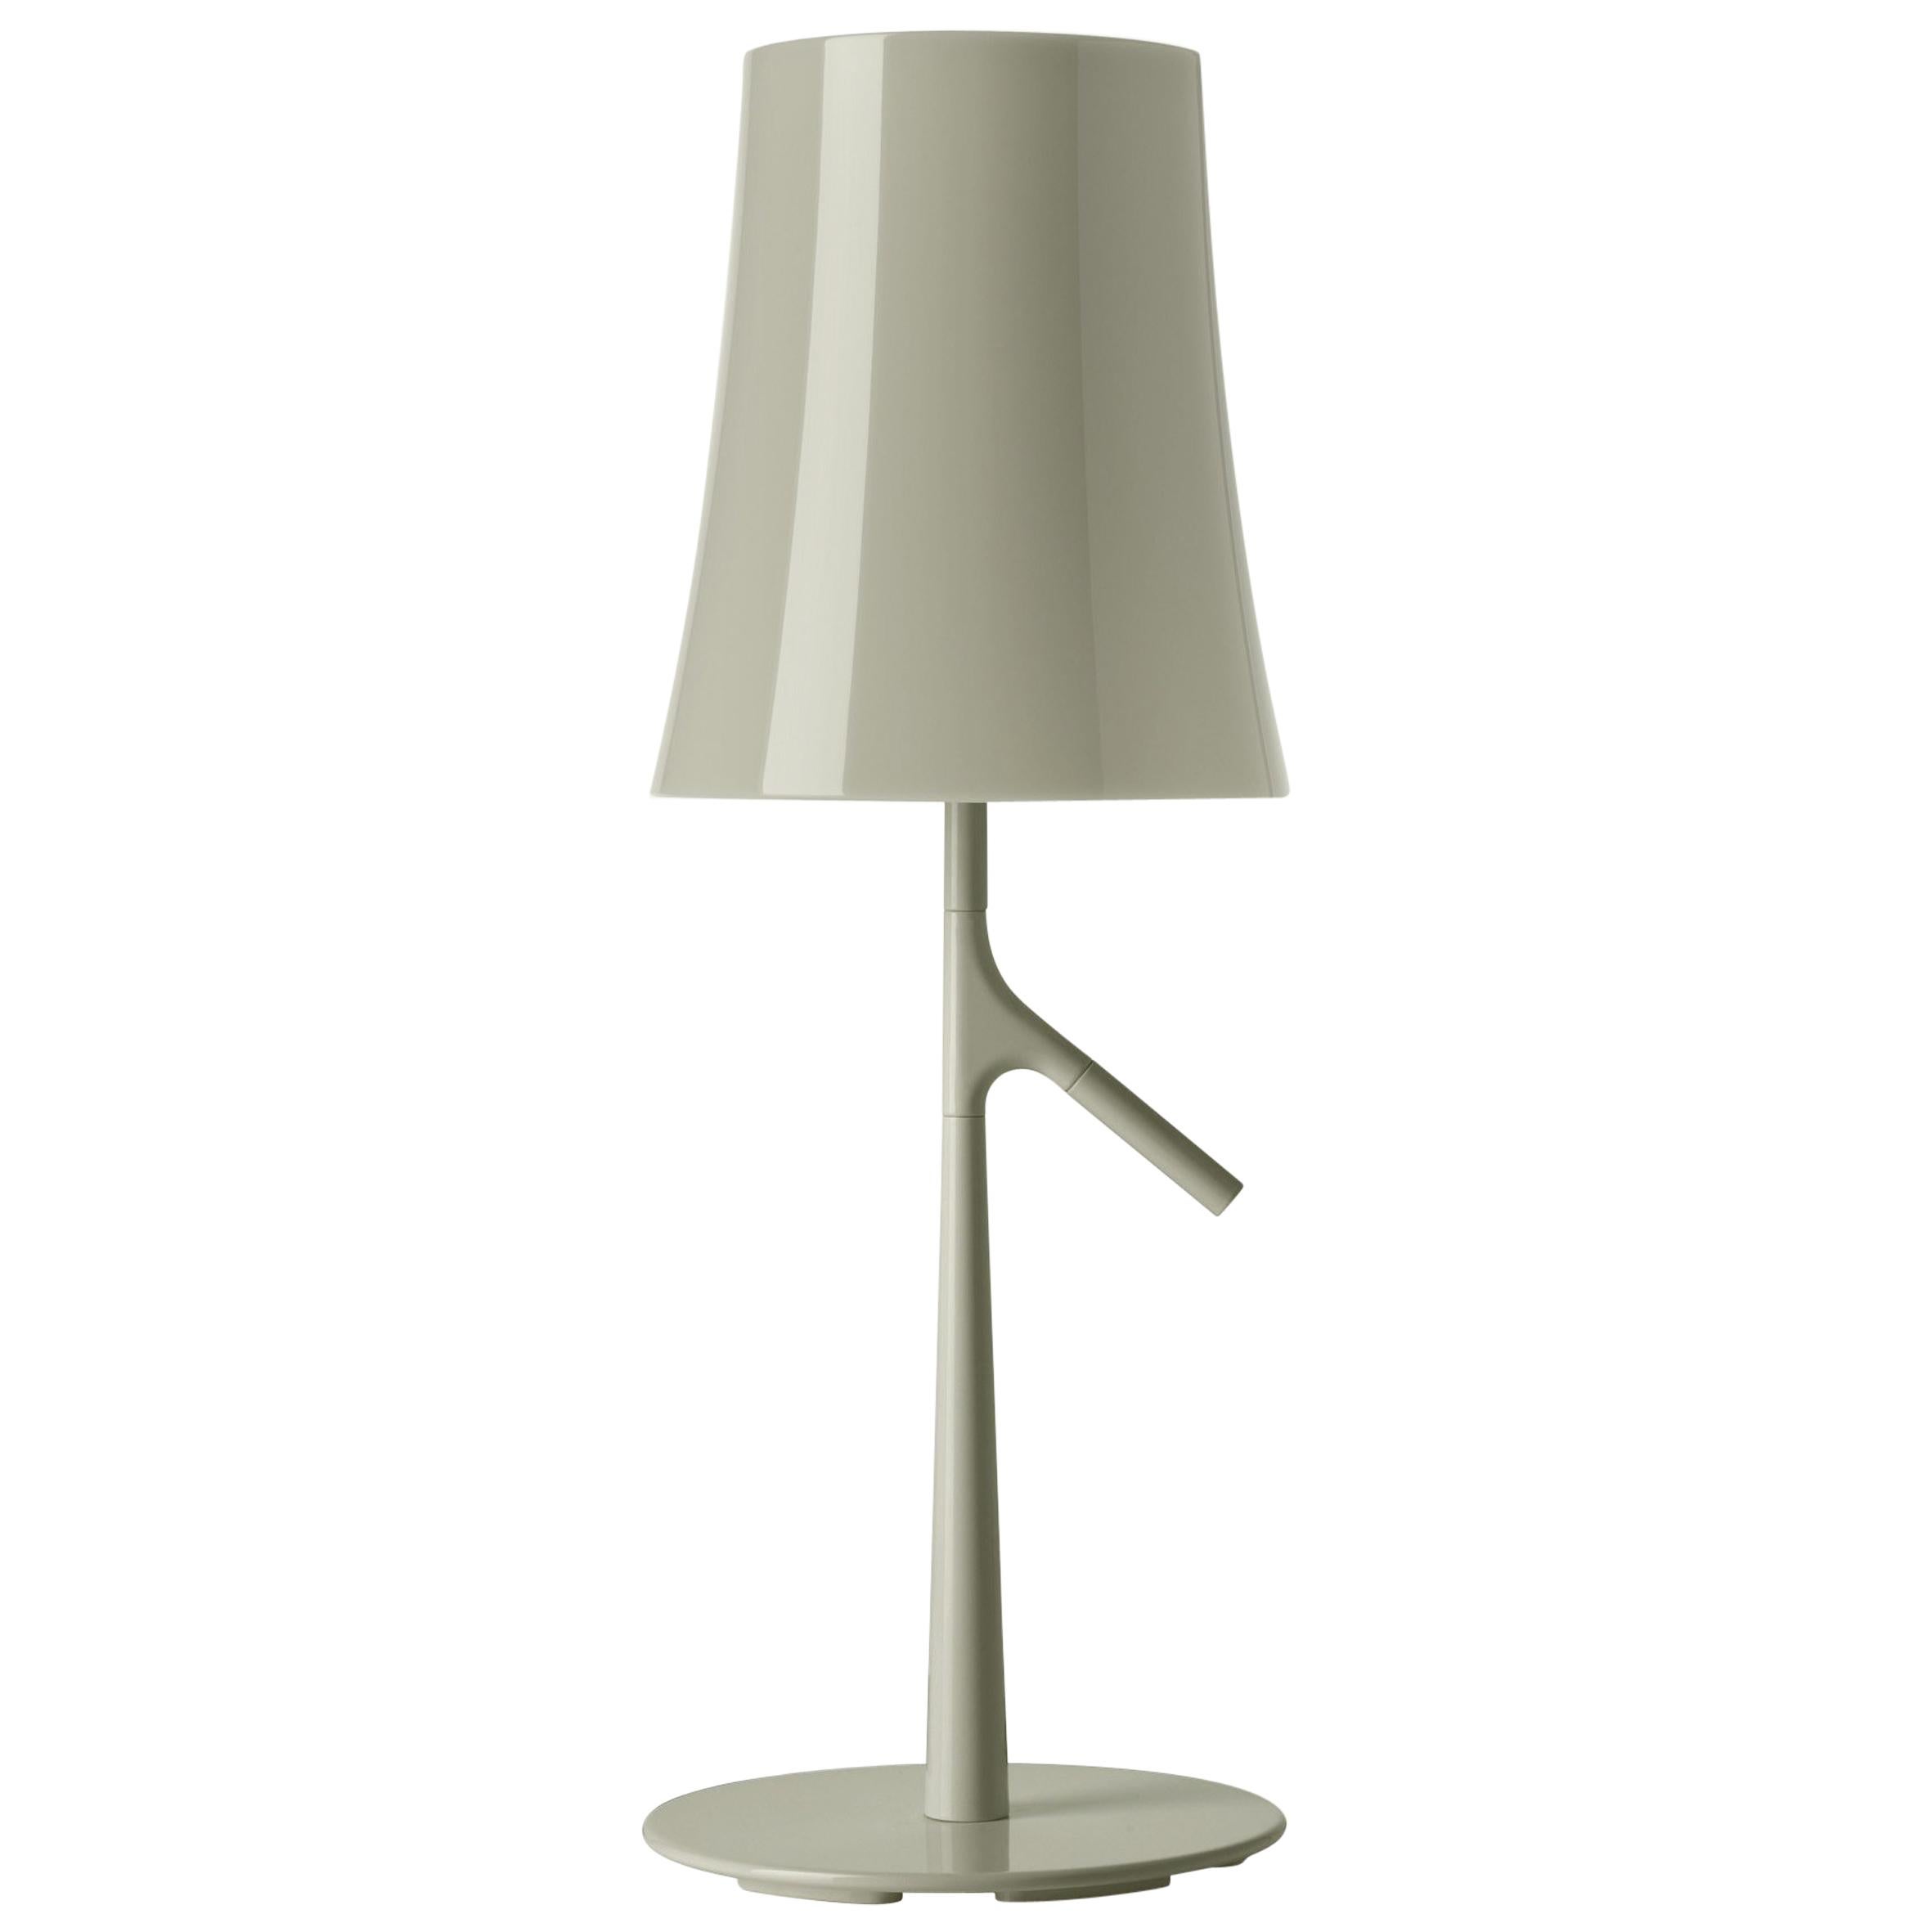 Foscarini Dimmable Birdie Small Table Lamp in Grey by Ludovica & Roberto Palomba For Sale